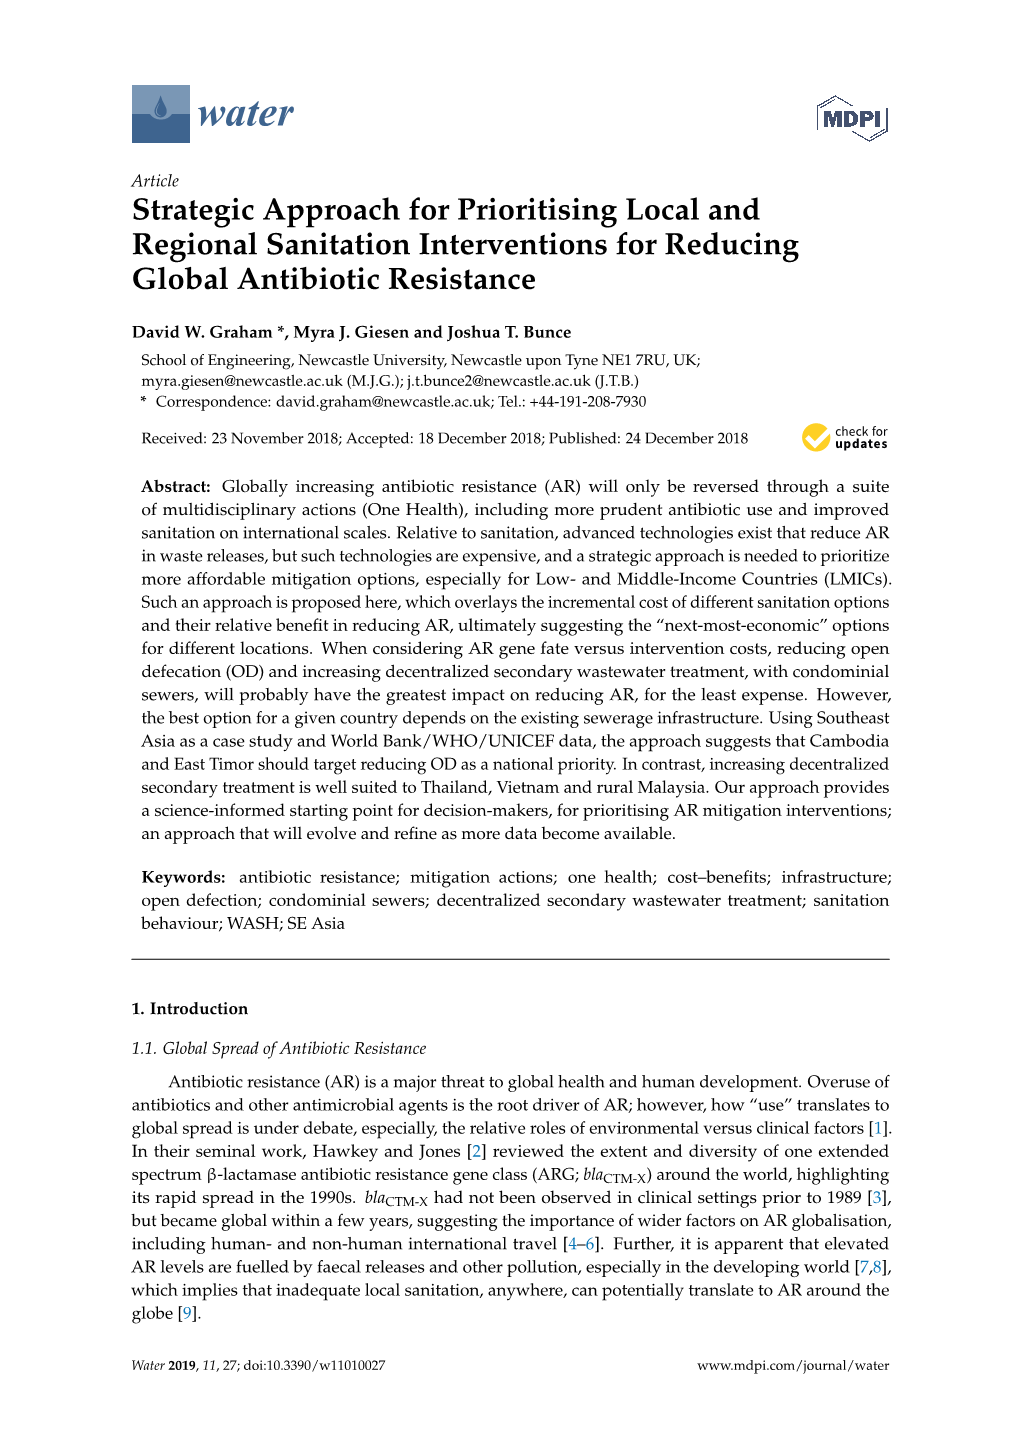 Strategic Approach for Prioritising Local and Regional Sanitation Interventions for Reducing Global Antibiotic Resistance